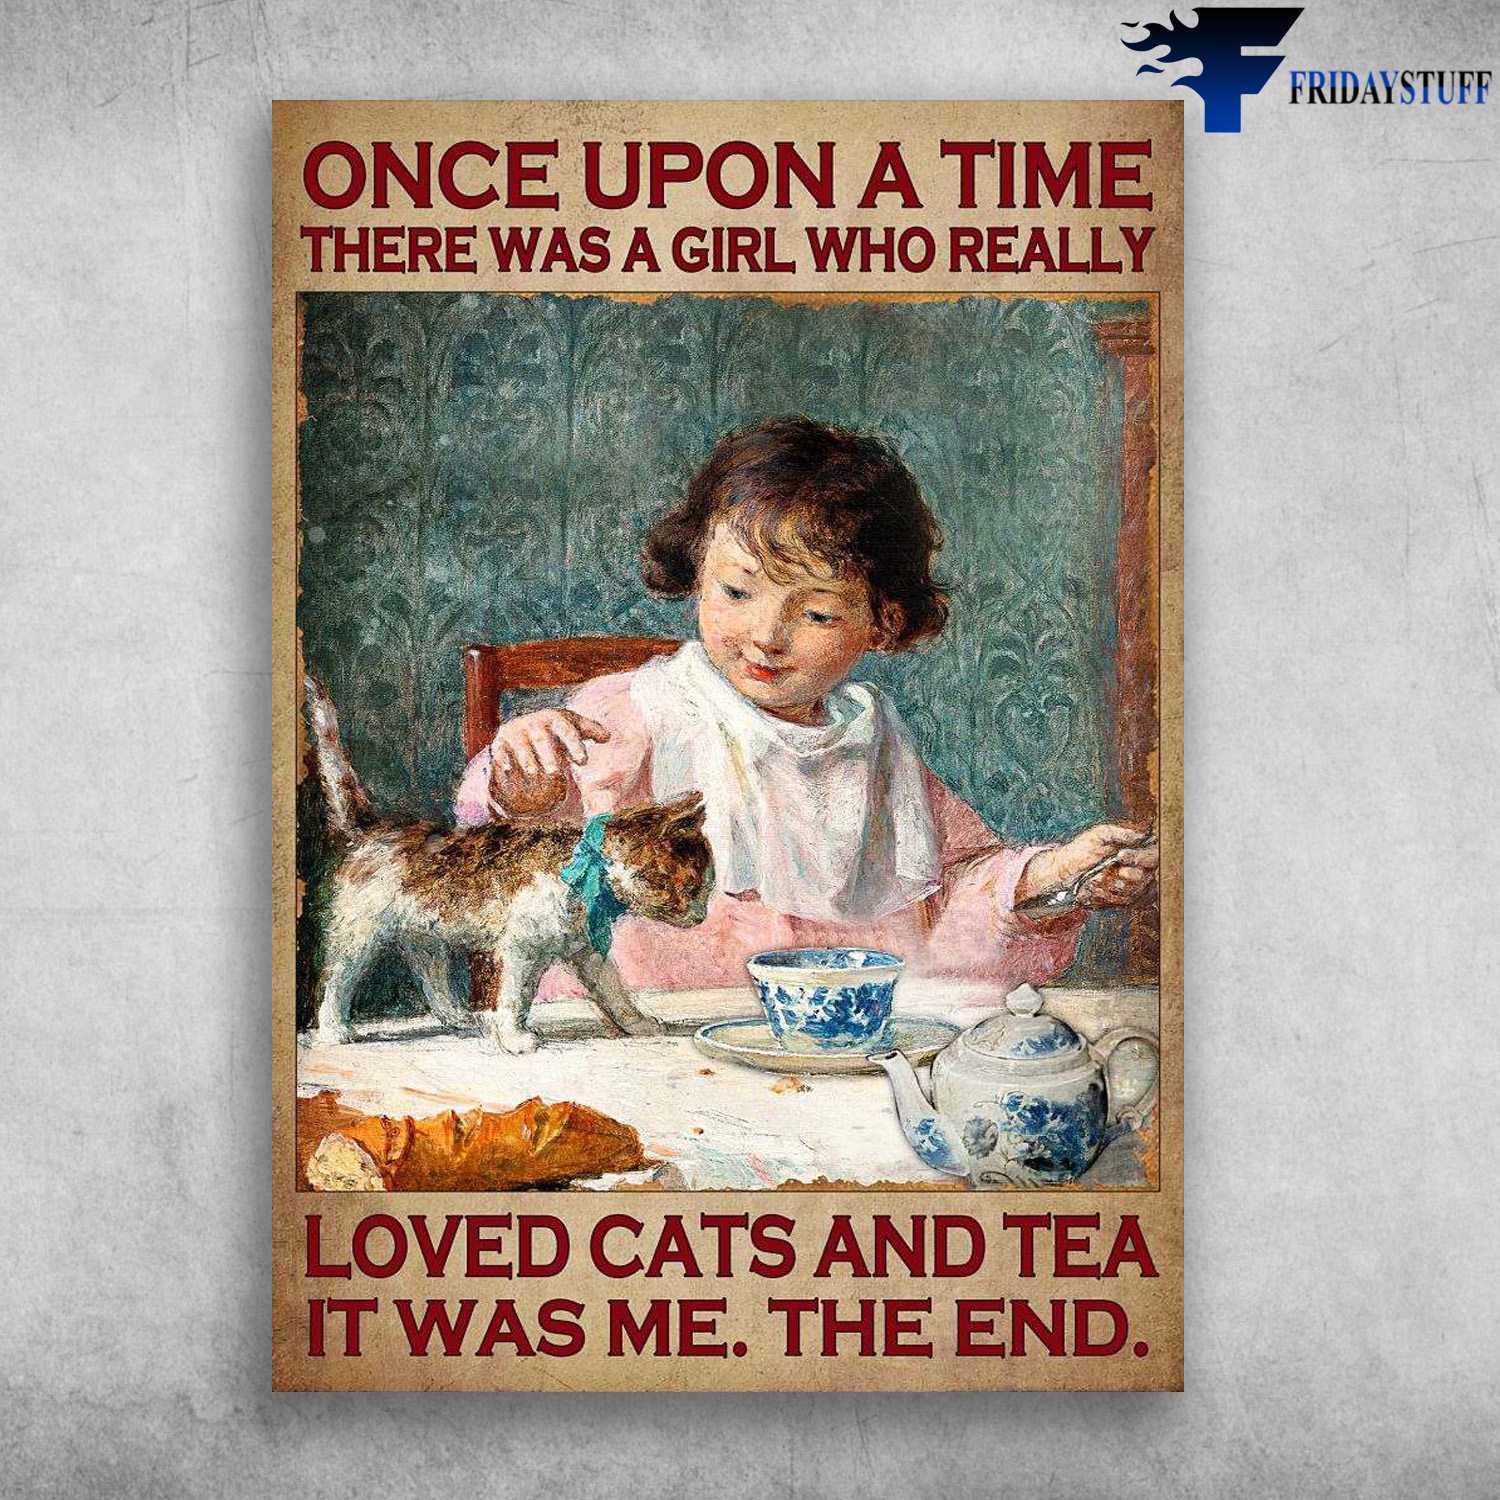 Little Girl, Cat And Tea - Once Upon A Time, There Was A Girl, Who Really Loved Cats And Tea, It Was Me, The End